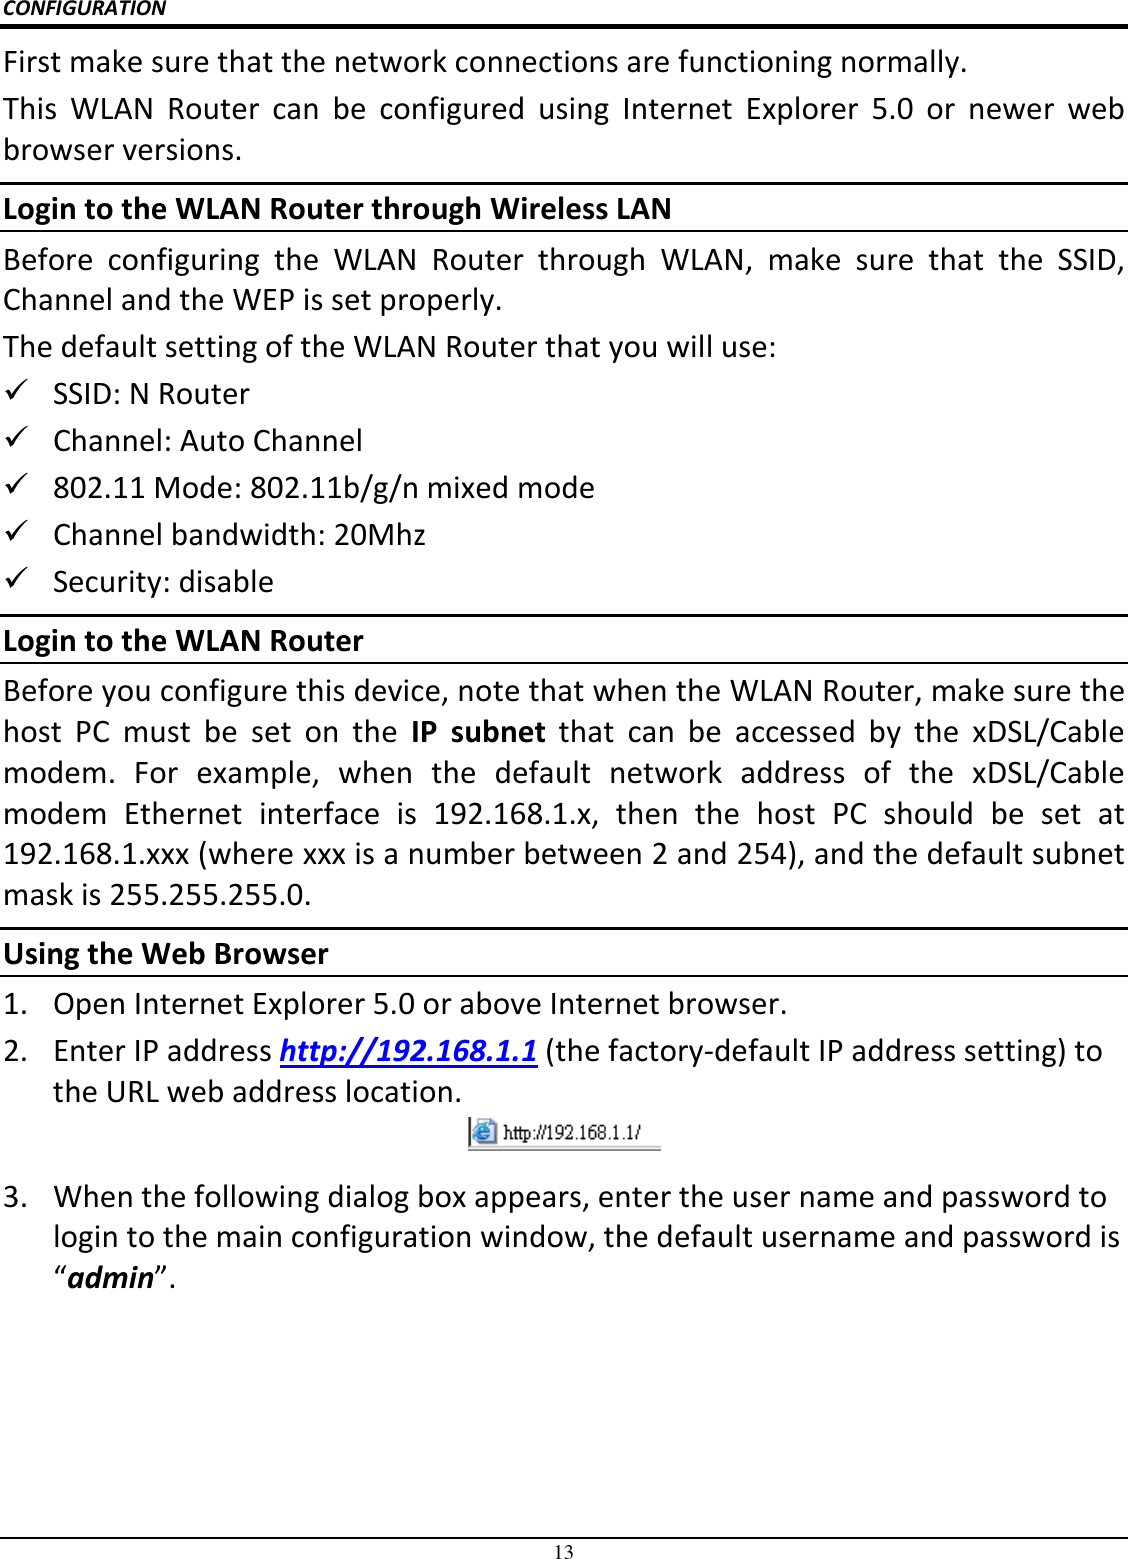 13 CONFIGURATION First make sure that the network connections are functioning normally.  This  WLAN  Router  can  be  configured  using  Internet  Explorer  5.0  or  newer  web browser versions. Login to the WLAN Router through Wireless LAN Before  configuring  the  WLAN  Router  through  WLAN,  make  sure  that  the  SSID, Channel and the WEP is set properly. The default setting of the WLAN Router that you will use:  SSID: N Router  Channel: Auto Channel  802.11 Mode: 802.11b/g/n mixed mode  Channel bandwidth: 20Mhz  Security: disable Login to the WLAN Router Before you configure this device, note that when the WLAN Router, make sure the host  PC  must  be  set  on  the  IP  subnet  that  can  be  accessed  by  the  xDSL/Cable modem.  For  example,  when  the  default  network  address  of  the  xDSL/Cable modem  Ethernet  interface  is  192.168.1.x,  then  the  host  PC  should  be  set  at 192.168.1.xxx (where xxx is a number between 2 and 254), and the default subnet mask is 255.255.255.0. Using the Web Browser 1. Open Internet Explorer 5.0 or above Internet browser. 2. Enter IP address http://192.168.1.1 (the factory-default IP address setting) to the URL web address location.  3. When the following dialog box appears, enter the user name and password to login to the main configuration window, the default username and password is “admin”. 